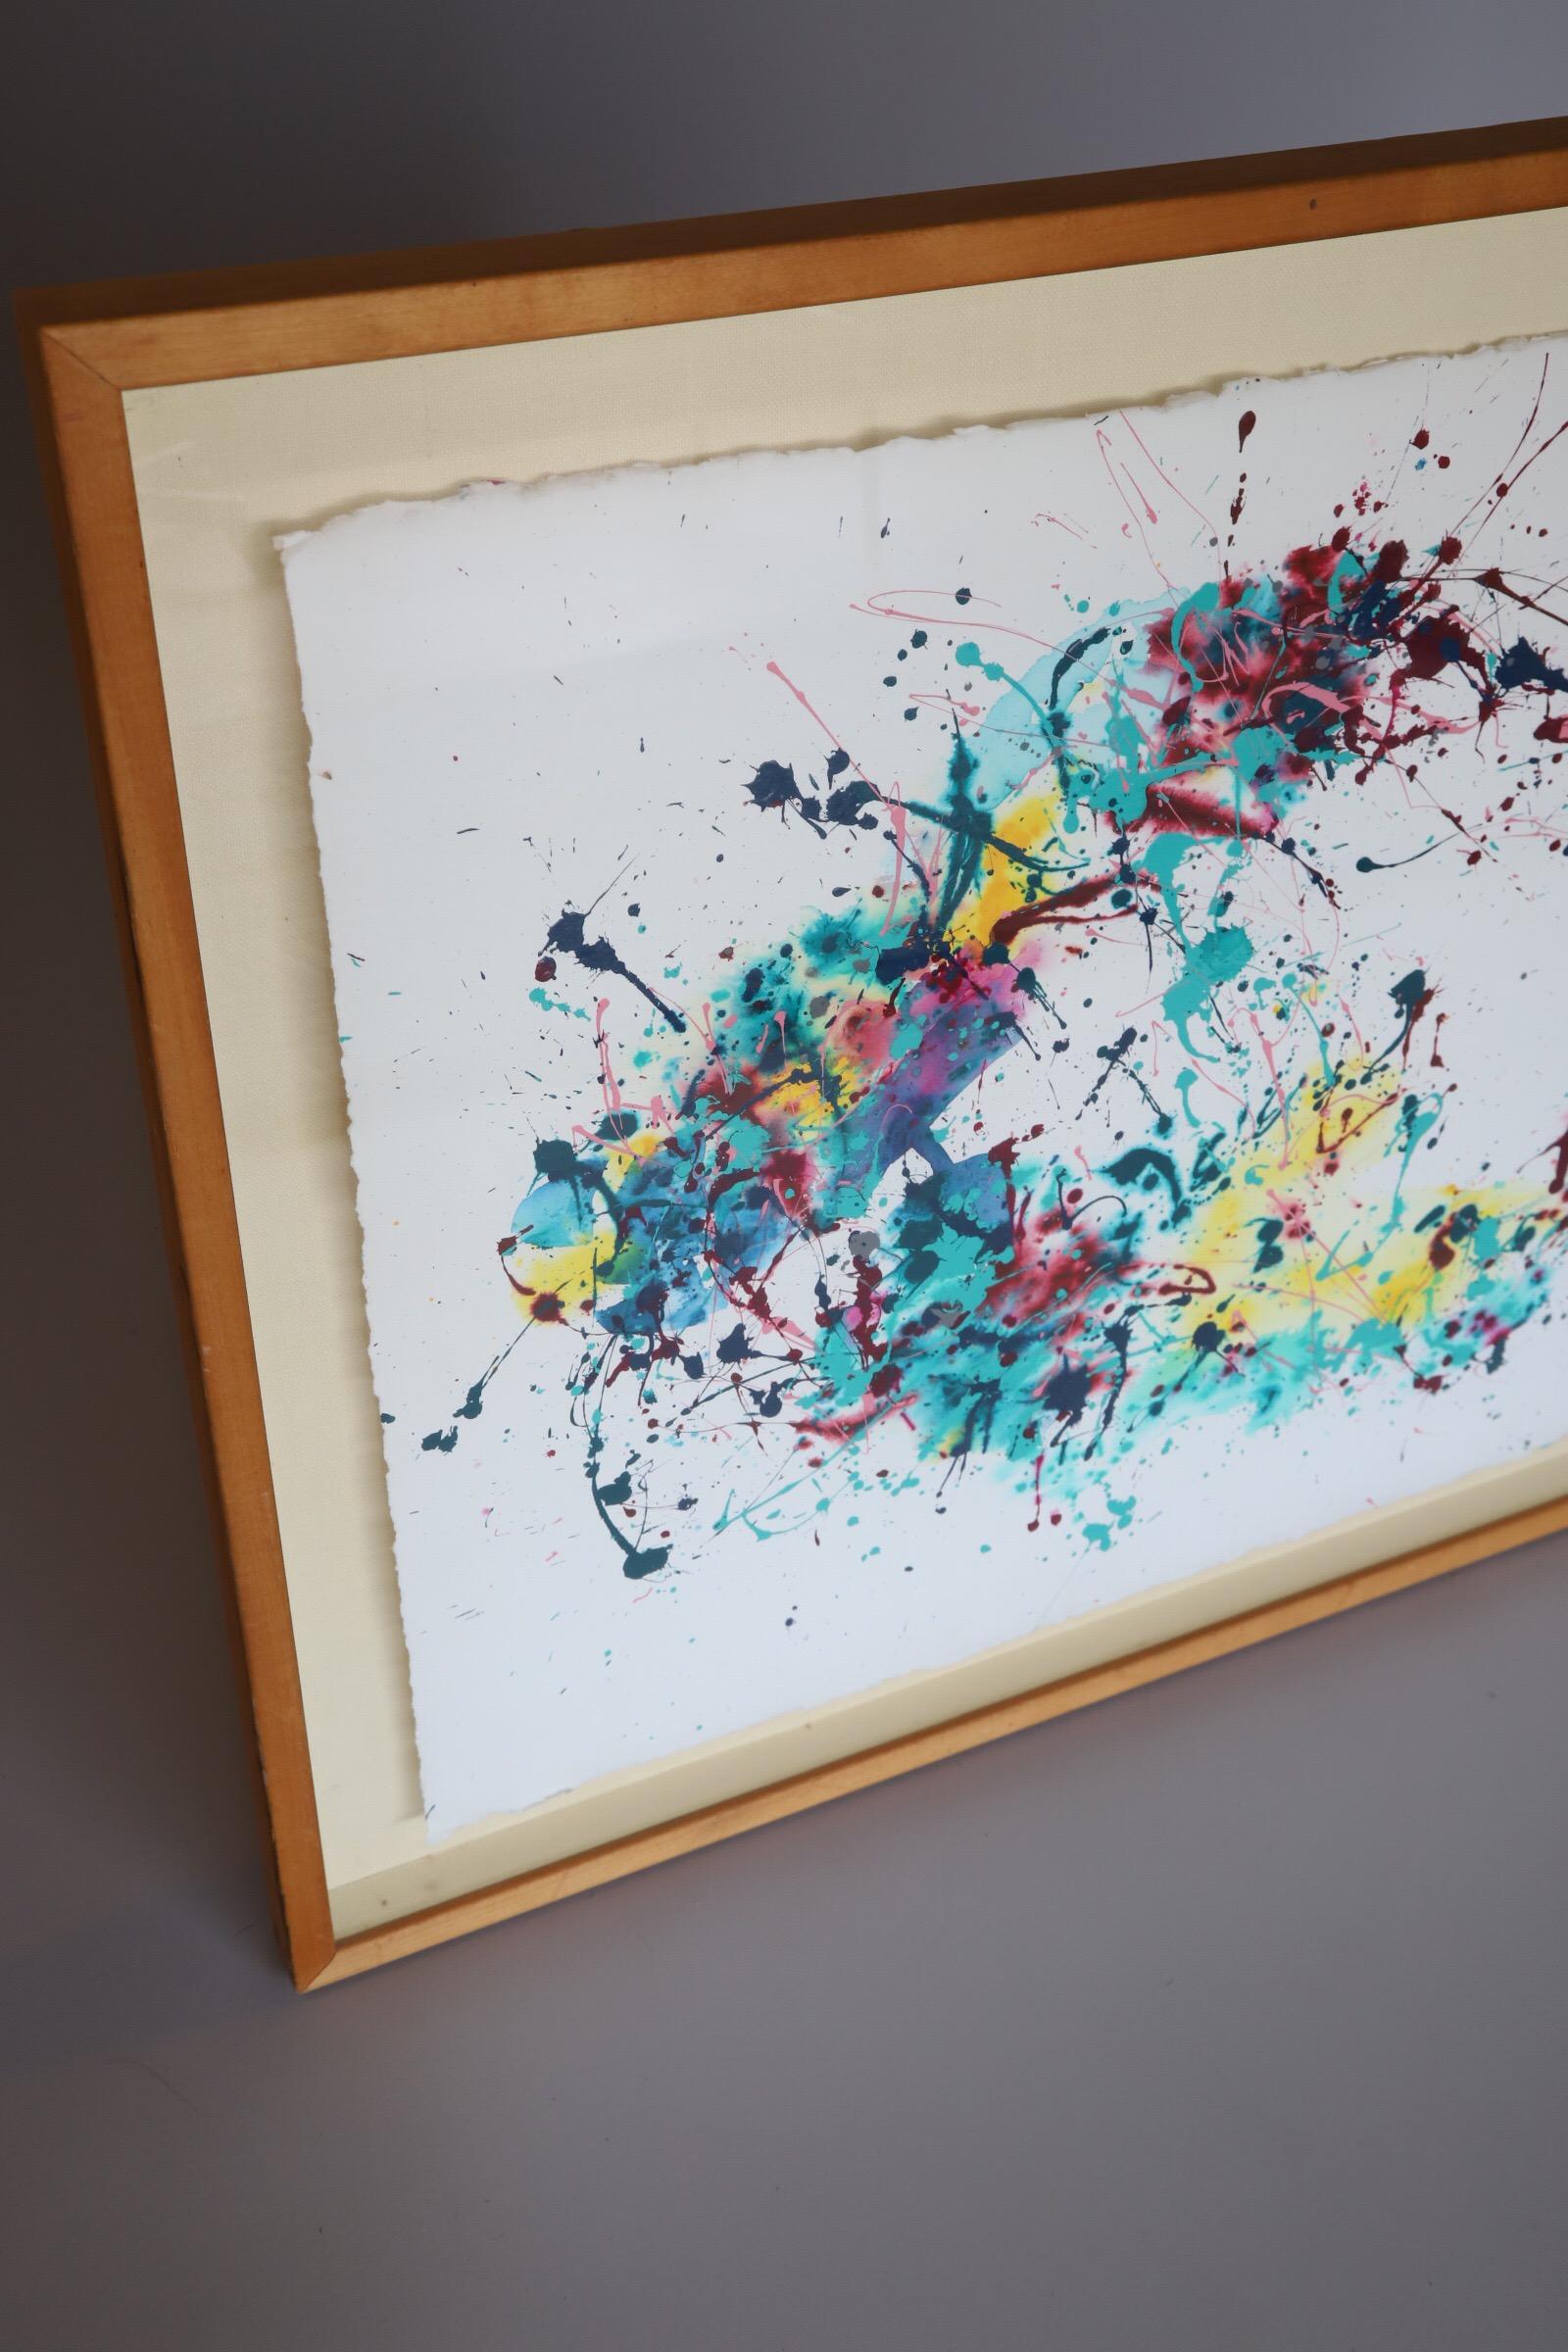 abstract splatter painting